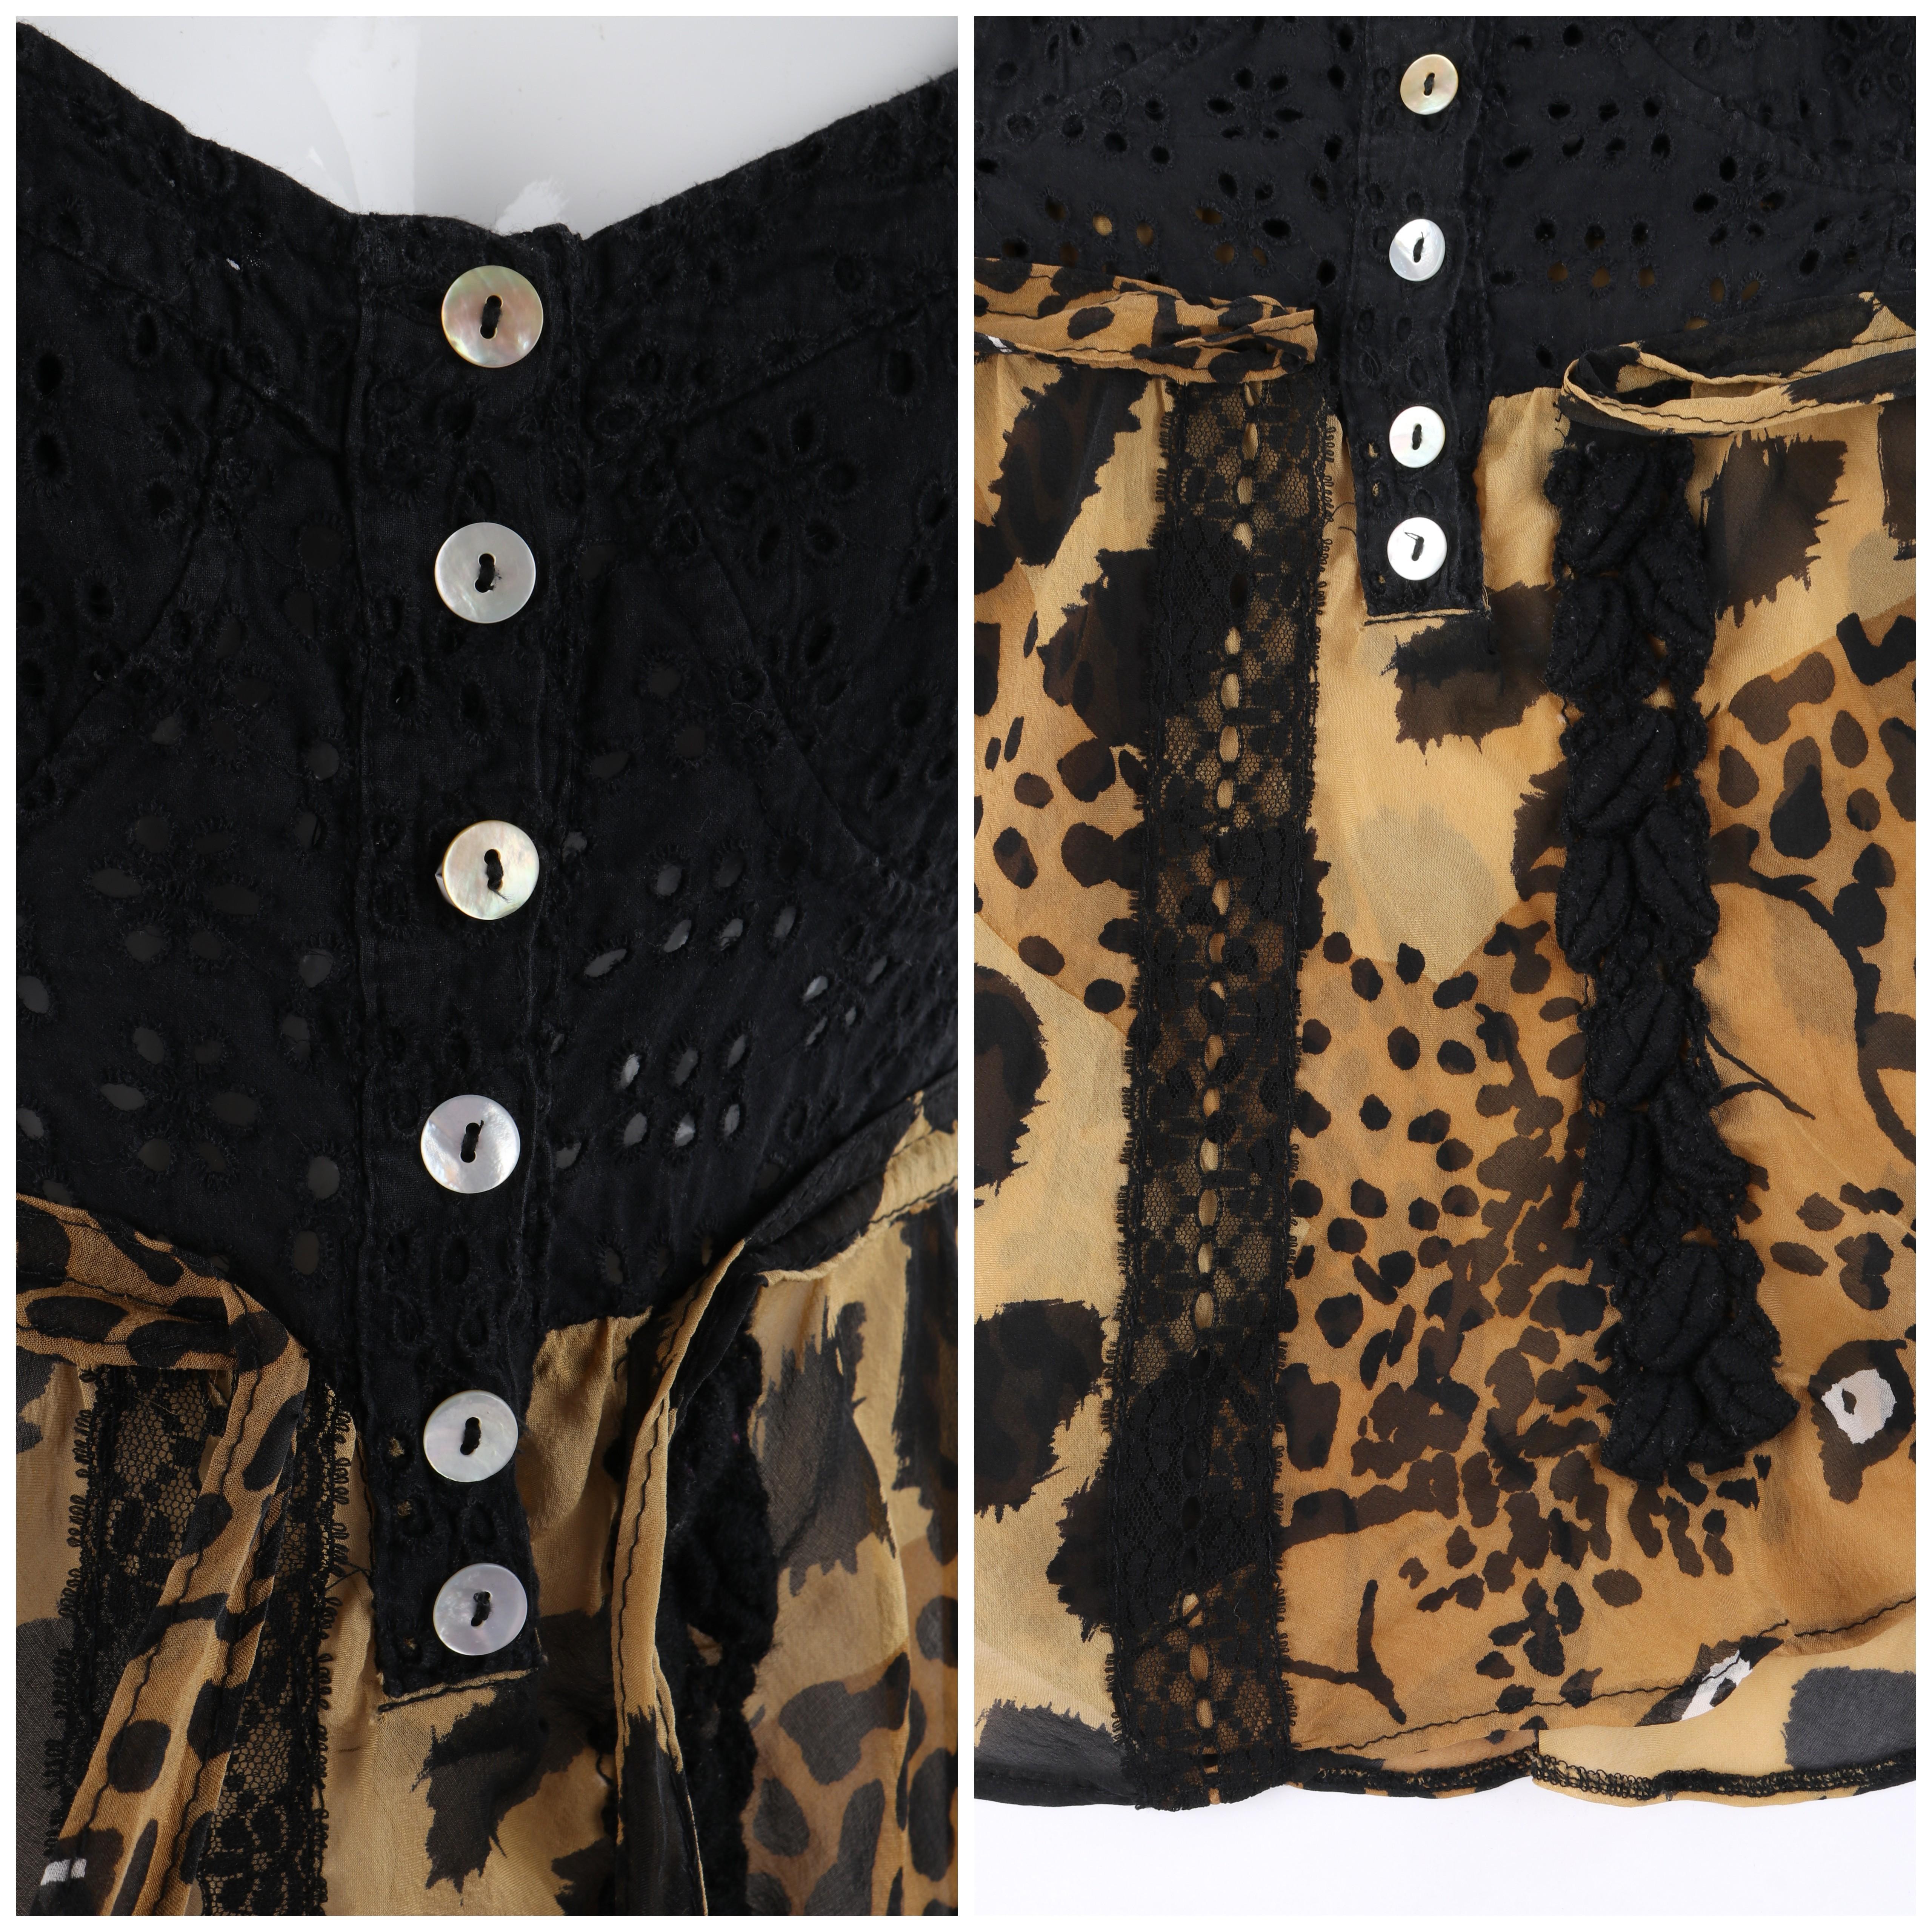 ALEXANDER McQUEEN S/S 1996 “The Hunger” Black Eyelet Leopard Chiffon Blouse Top For Sale 2